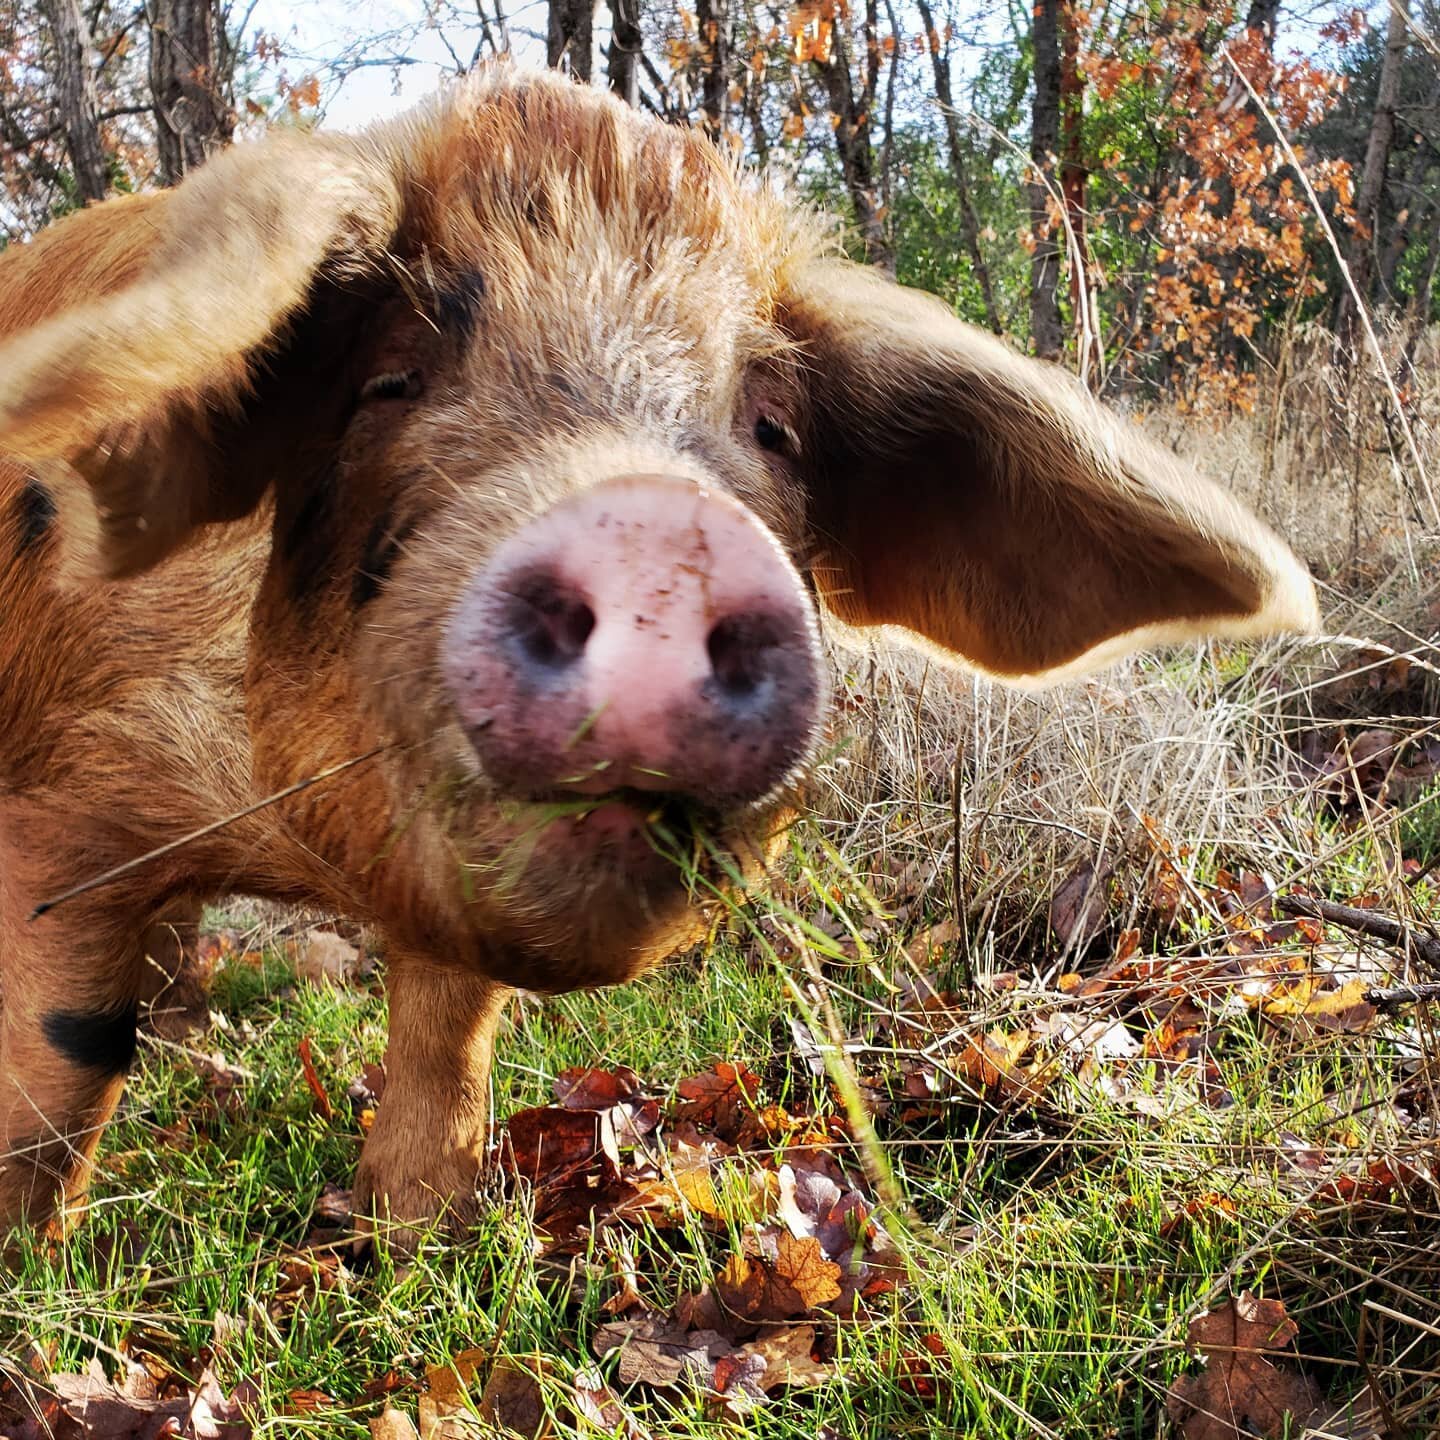 What's up? I'm Dumbo. I dig long walks in the oak meadow, cleaning up fallen acorns, fresh pasture and getting my butt scratched. 

How bout yourself???

Unlike your standard store bought pork, we let our pigs forage and develop naturally on a Southe